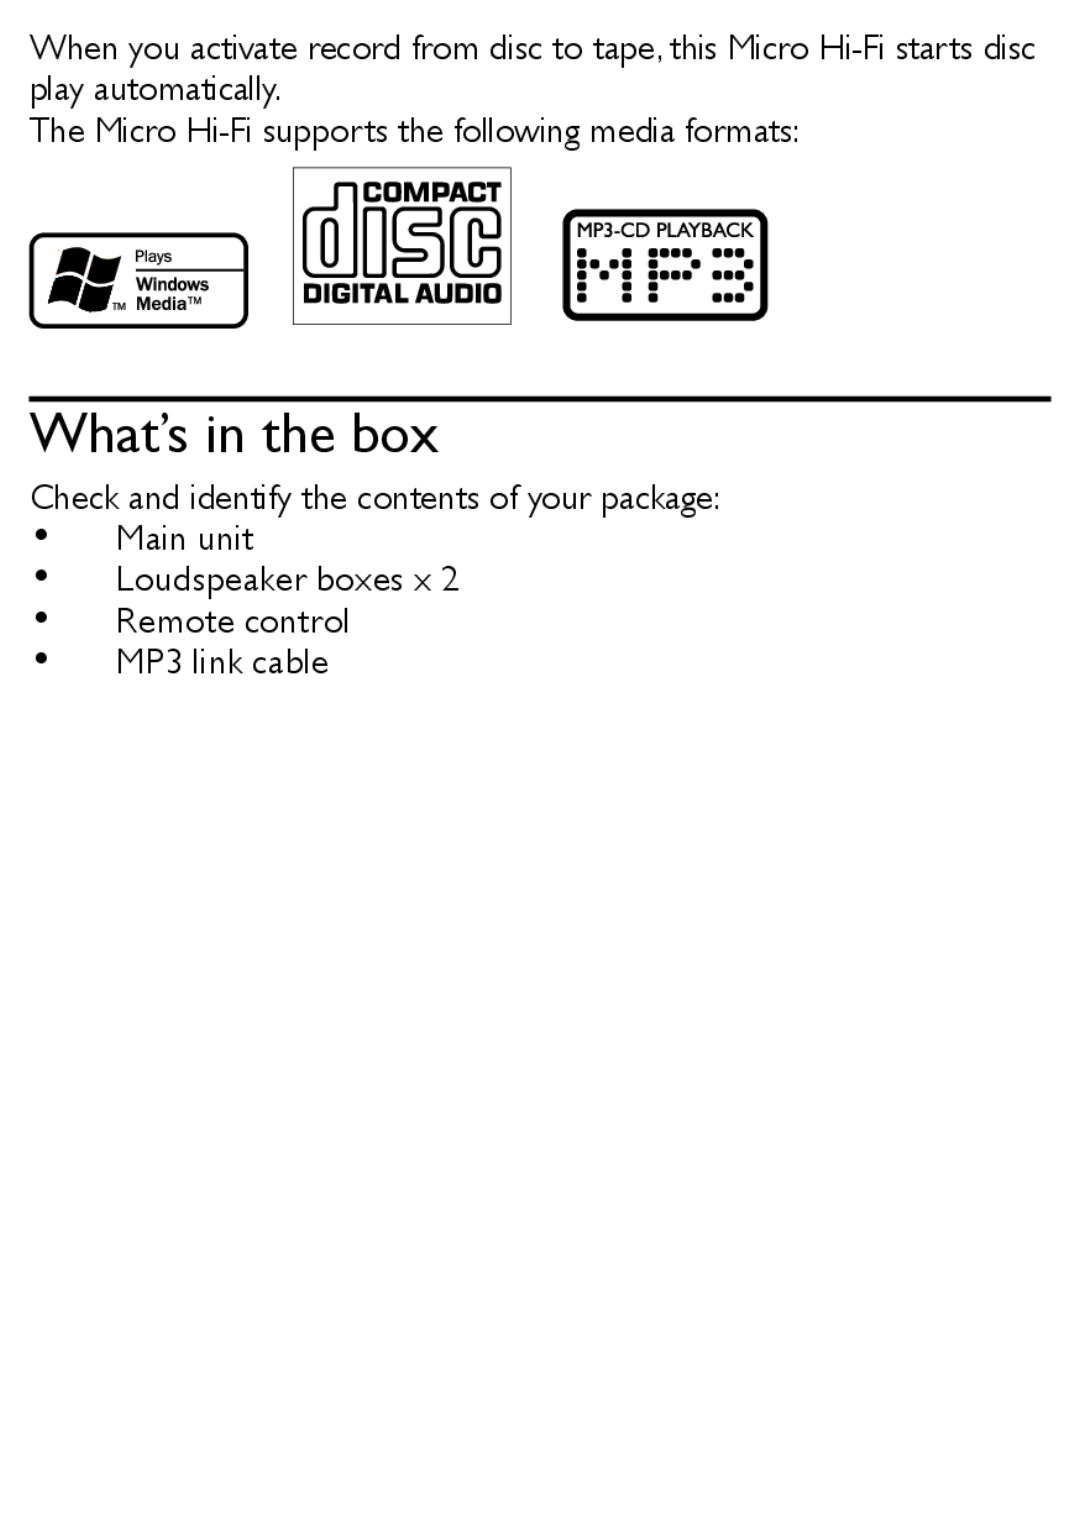 Philips MCM167 user manual What’s in the box, Check and identify the contents of your package, MP3 link cable 